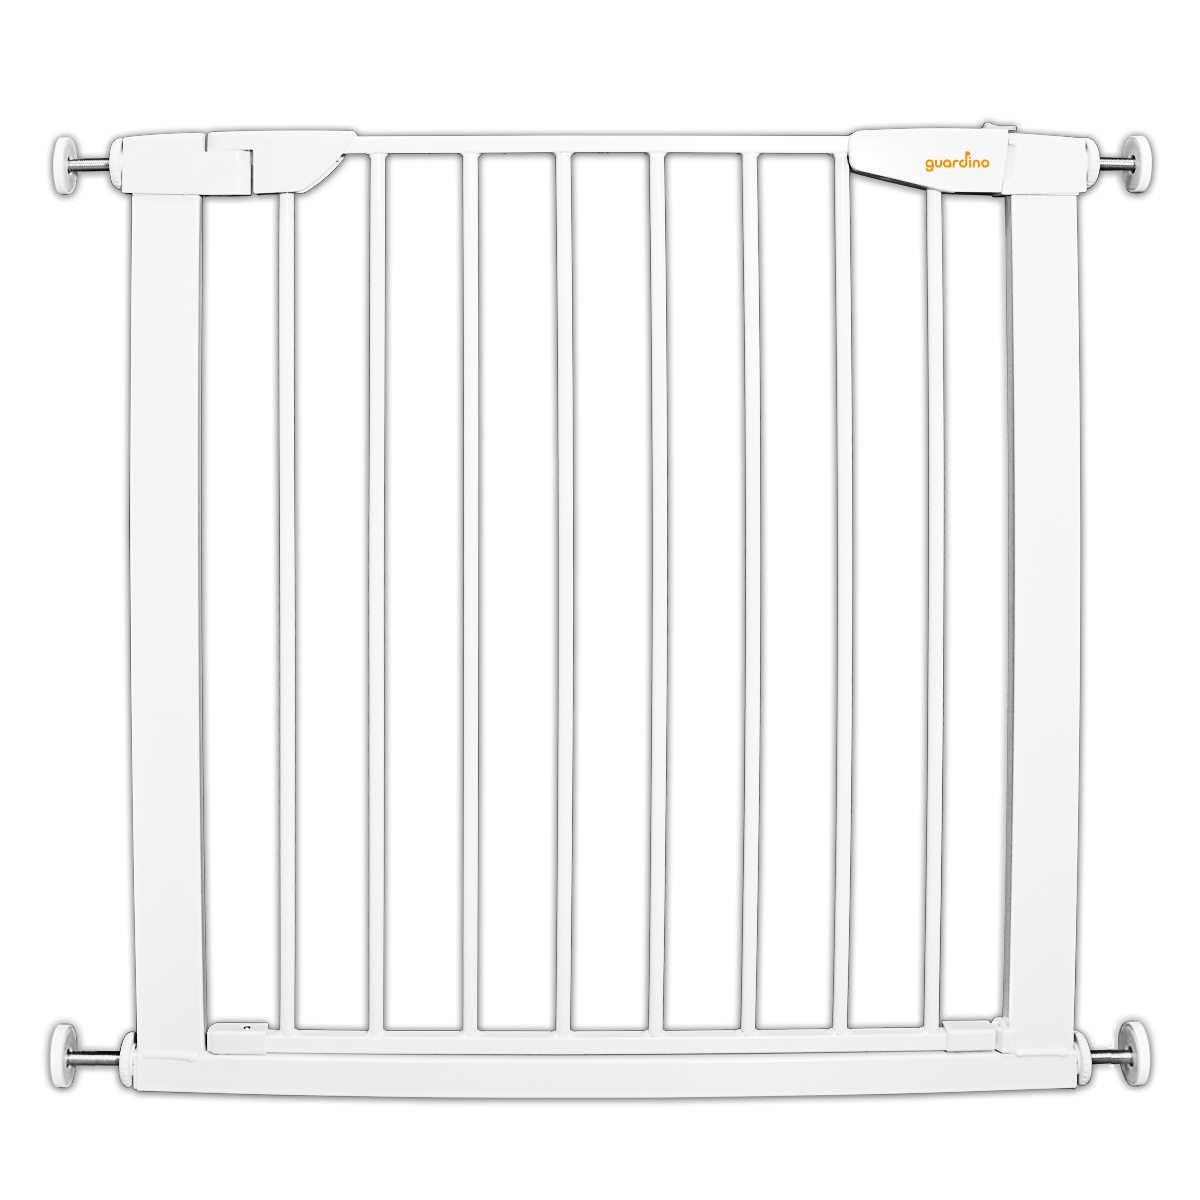 Guardino Pressure-mounted gate 75-81 cm, extendable up to 109 cm - Stair guard without drilling